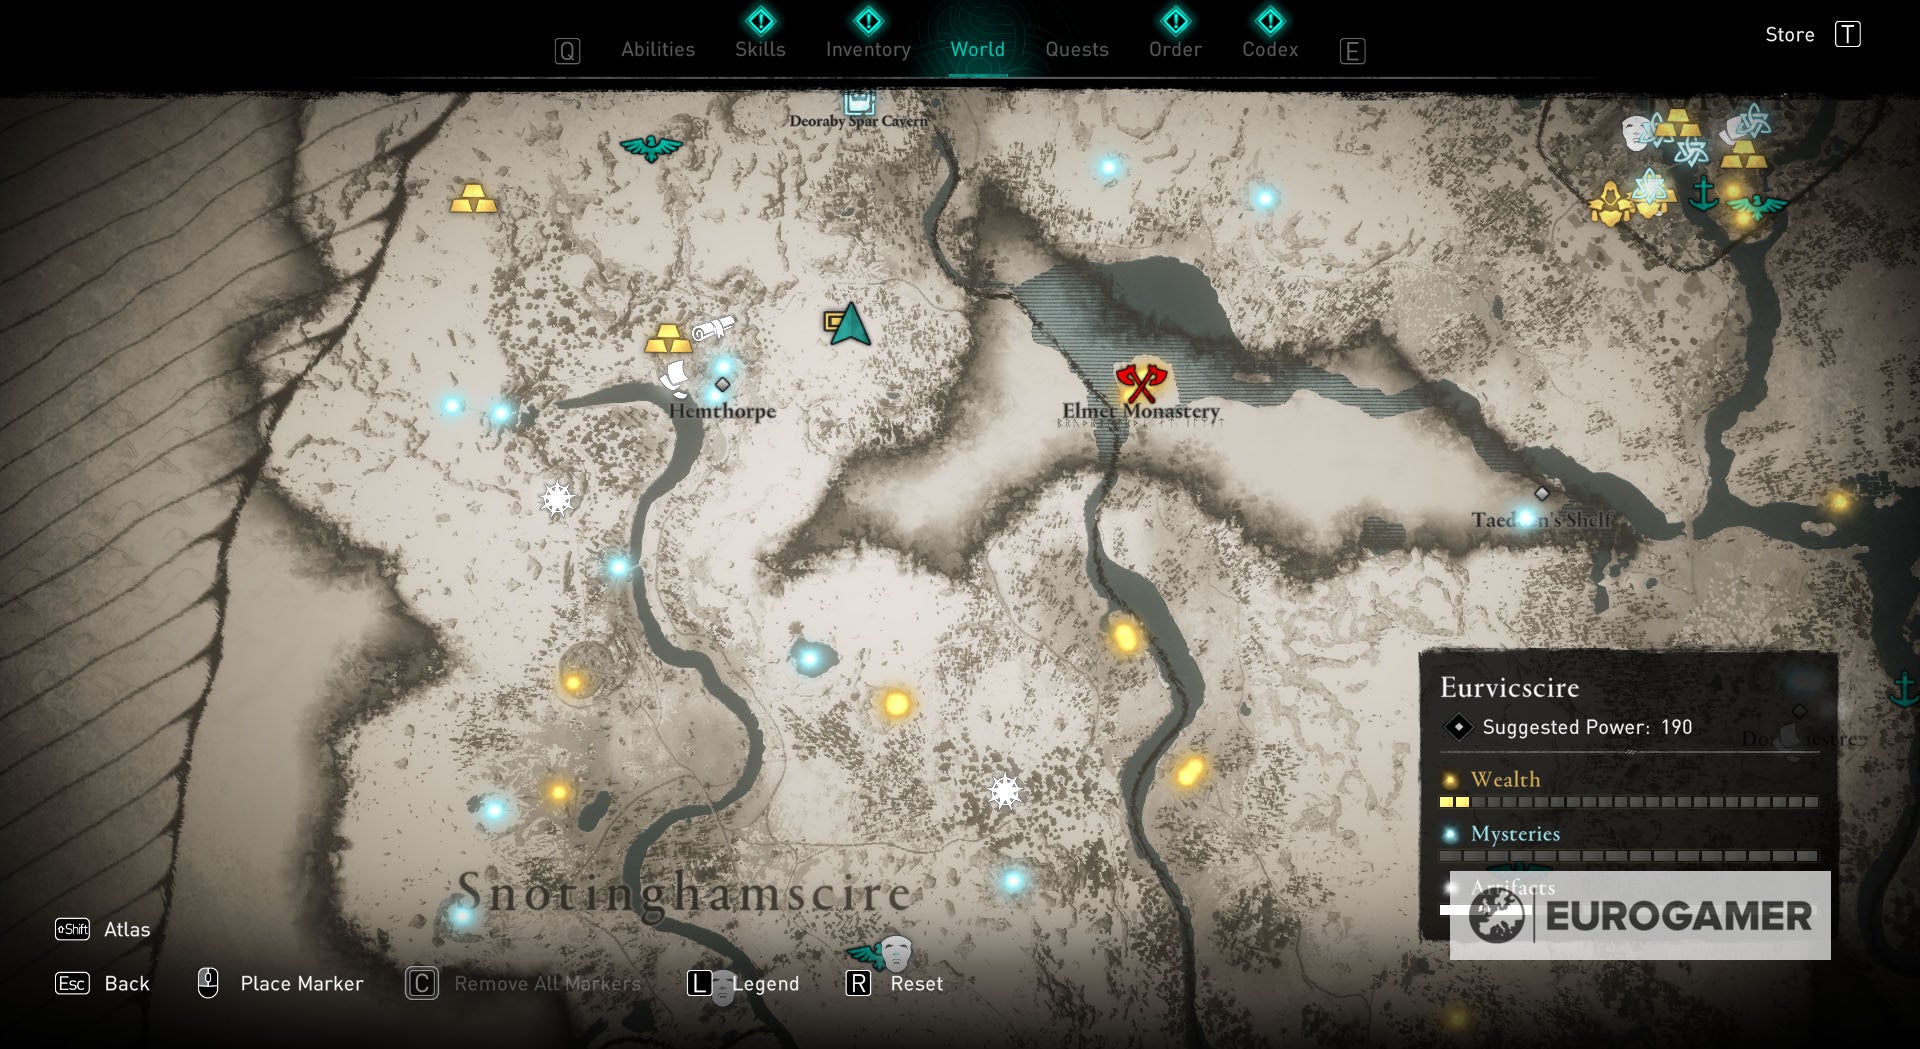 Assassin S Creed Valhalla Treasure Hoard Map Locations List By